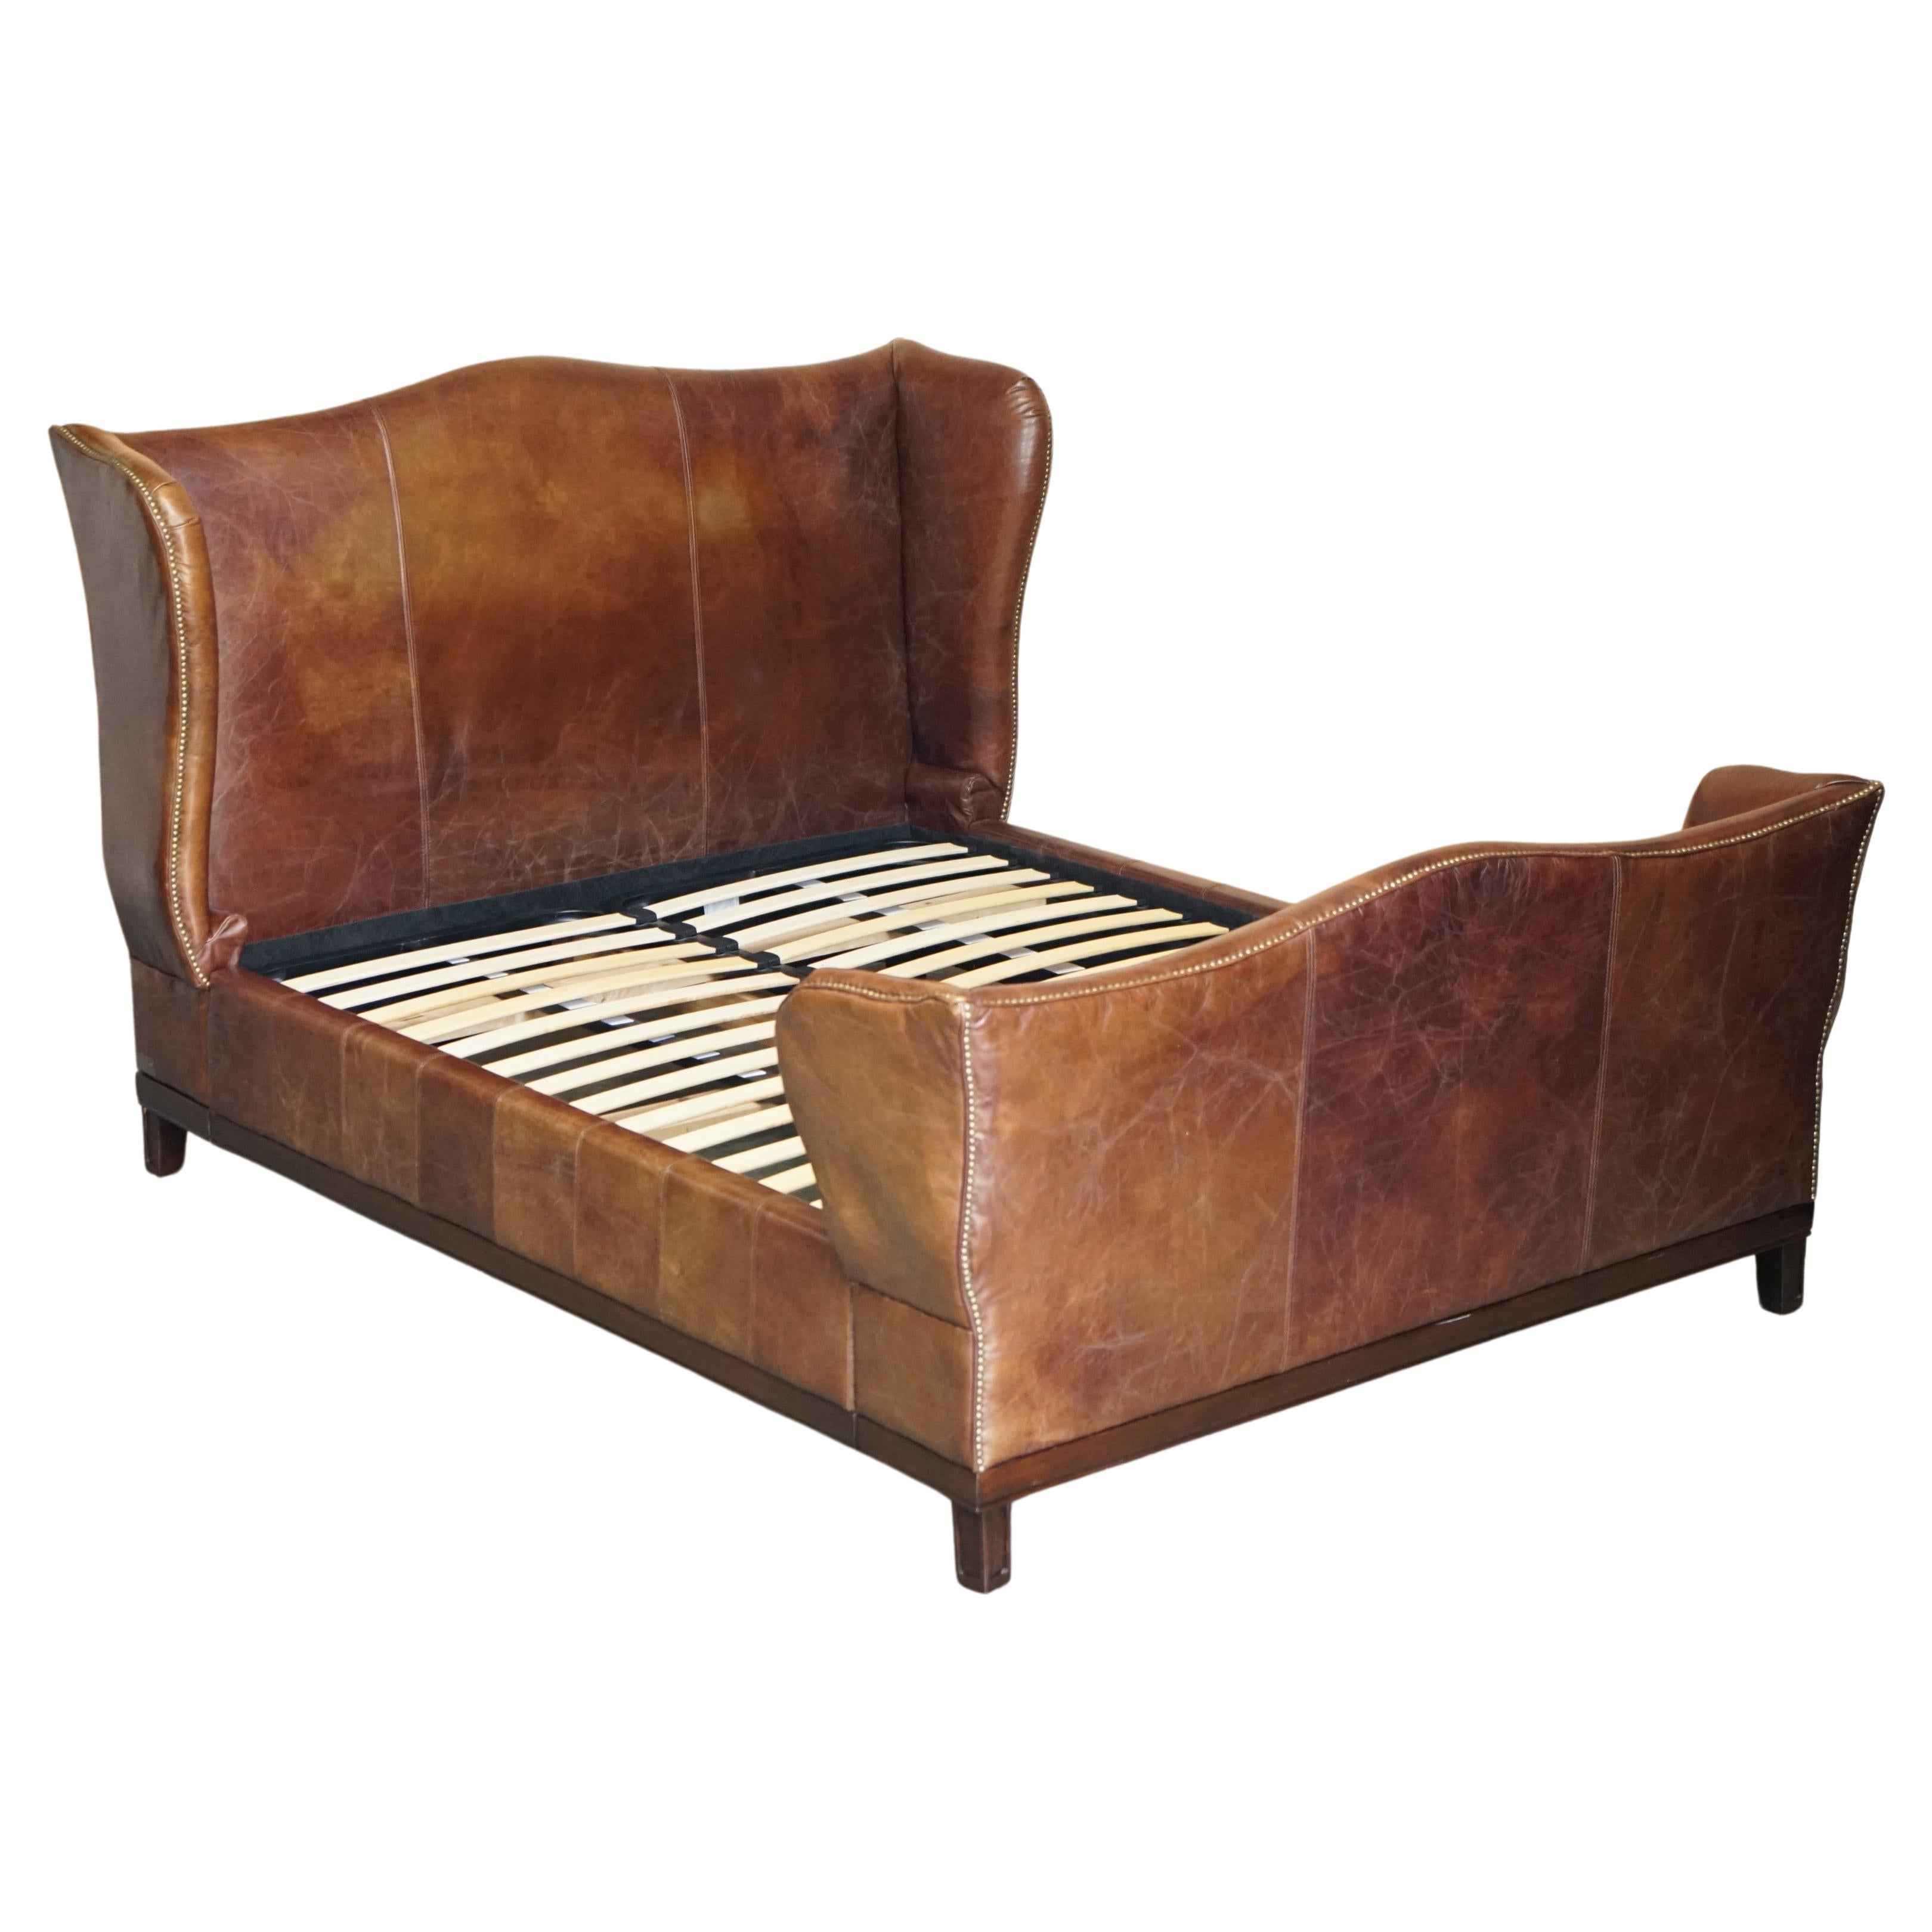 STUNNING VERY RARE HAND DYED HERITAGE BROWN LEATHER WINGBACK KiNG SIZE BED FRAME